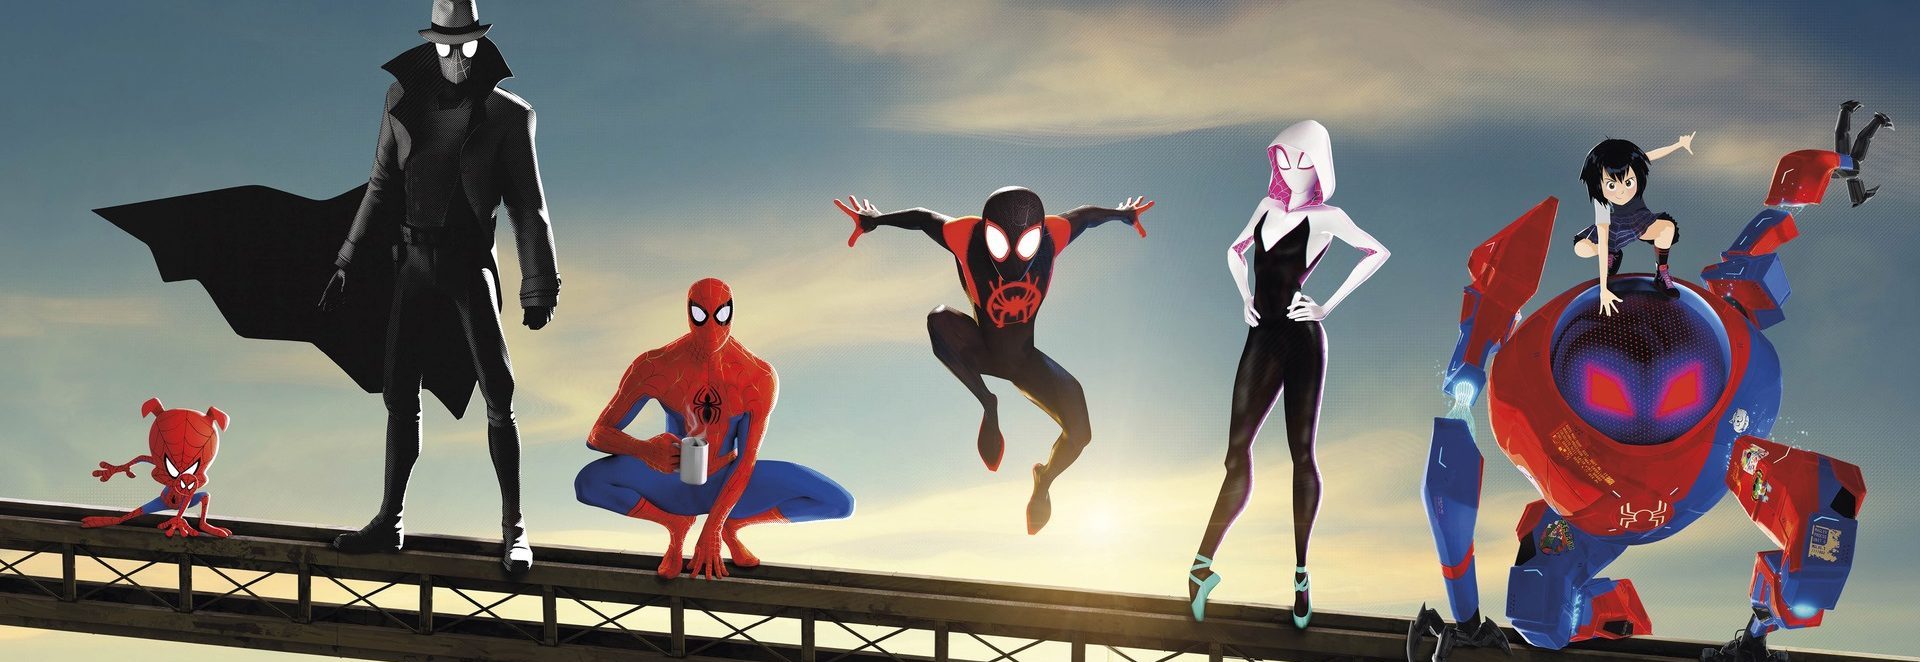 spider-man-into-the-spider-verse-5be6cb73adae8-1-e1545766851470.jpg